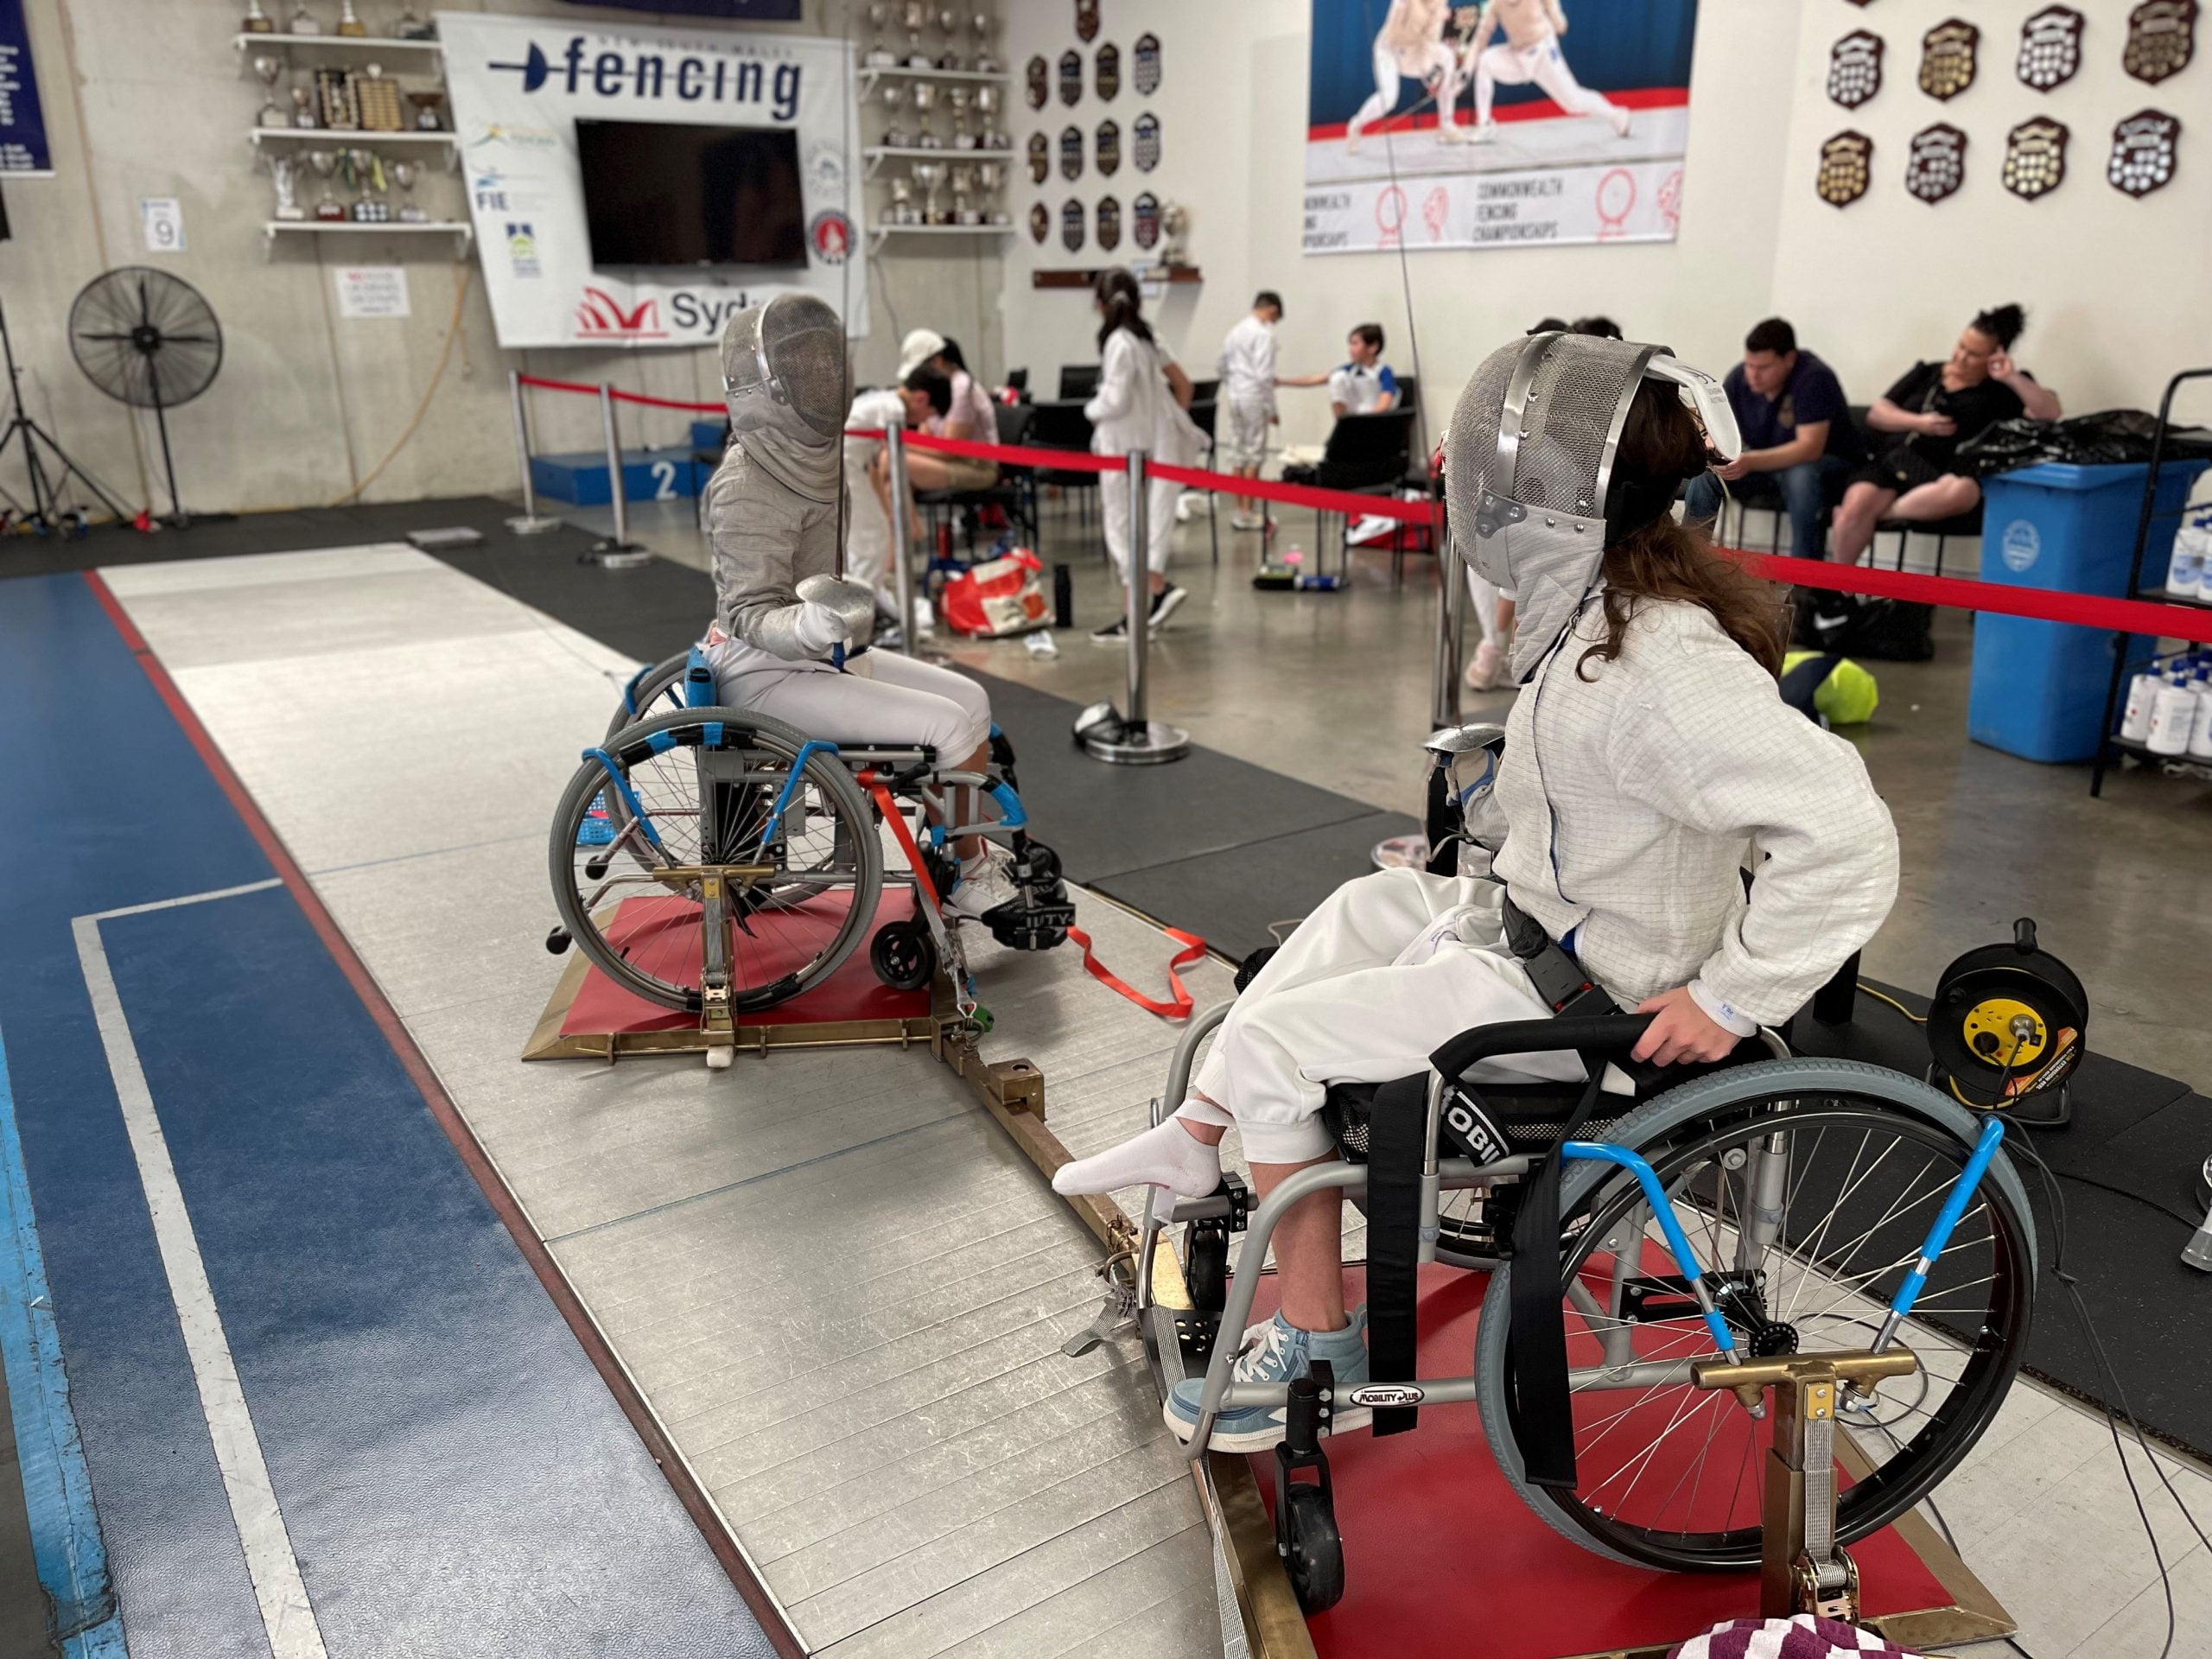 Children competing in wheelchair fencing.